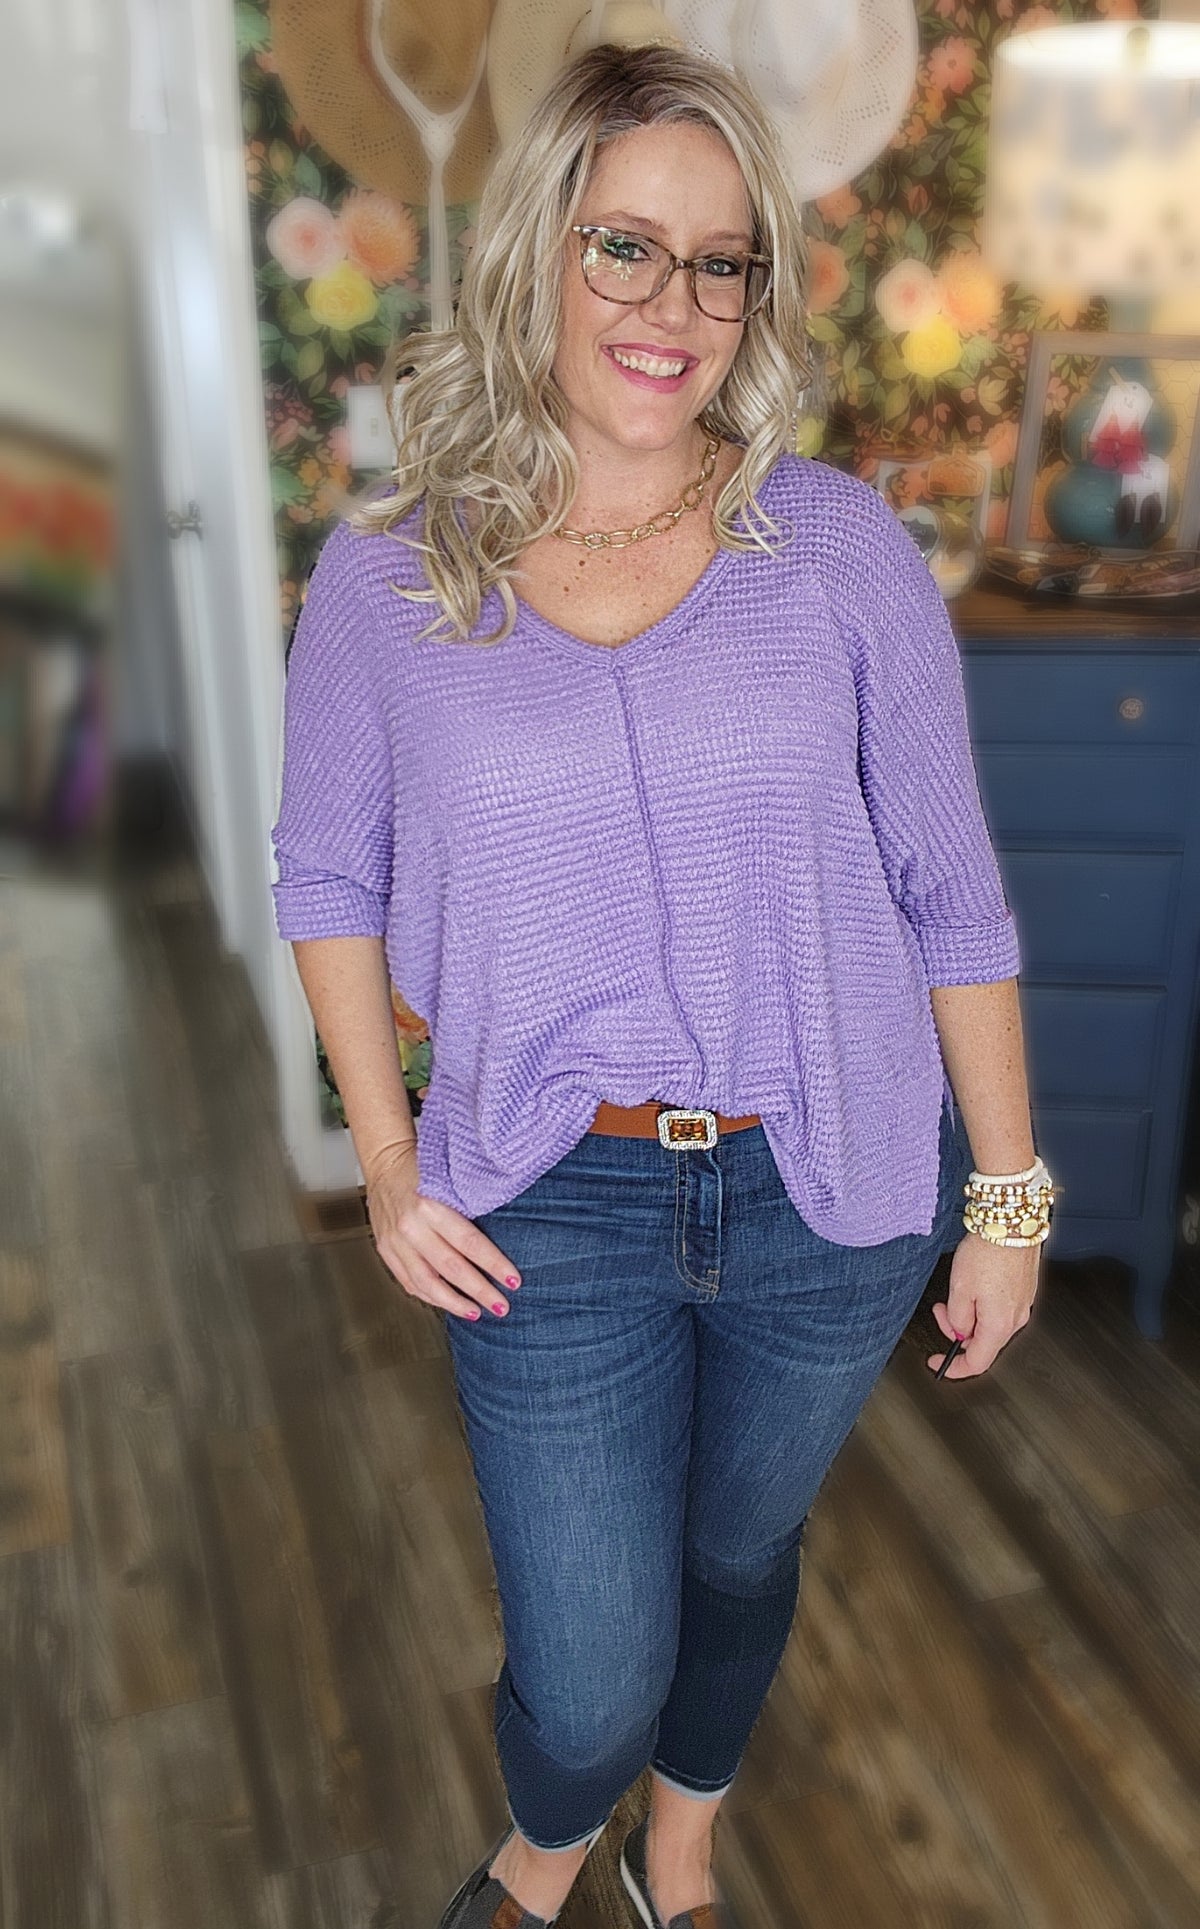 Dolly 3/4 Sleeve Loose Knit Blouse Sm - XL in Lavender